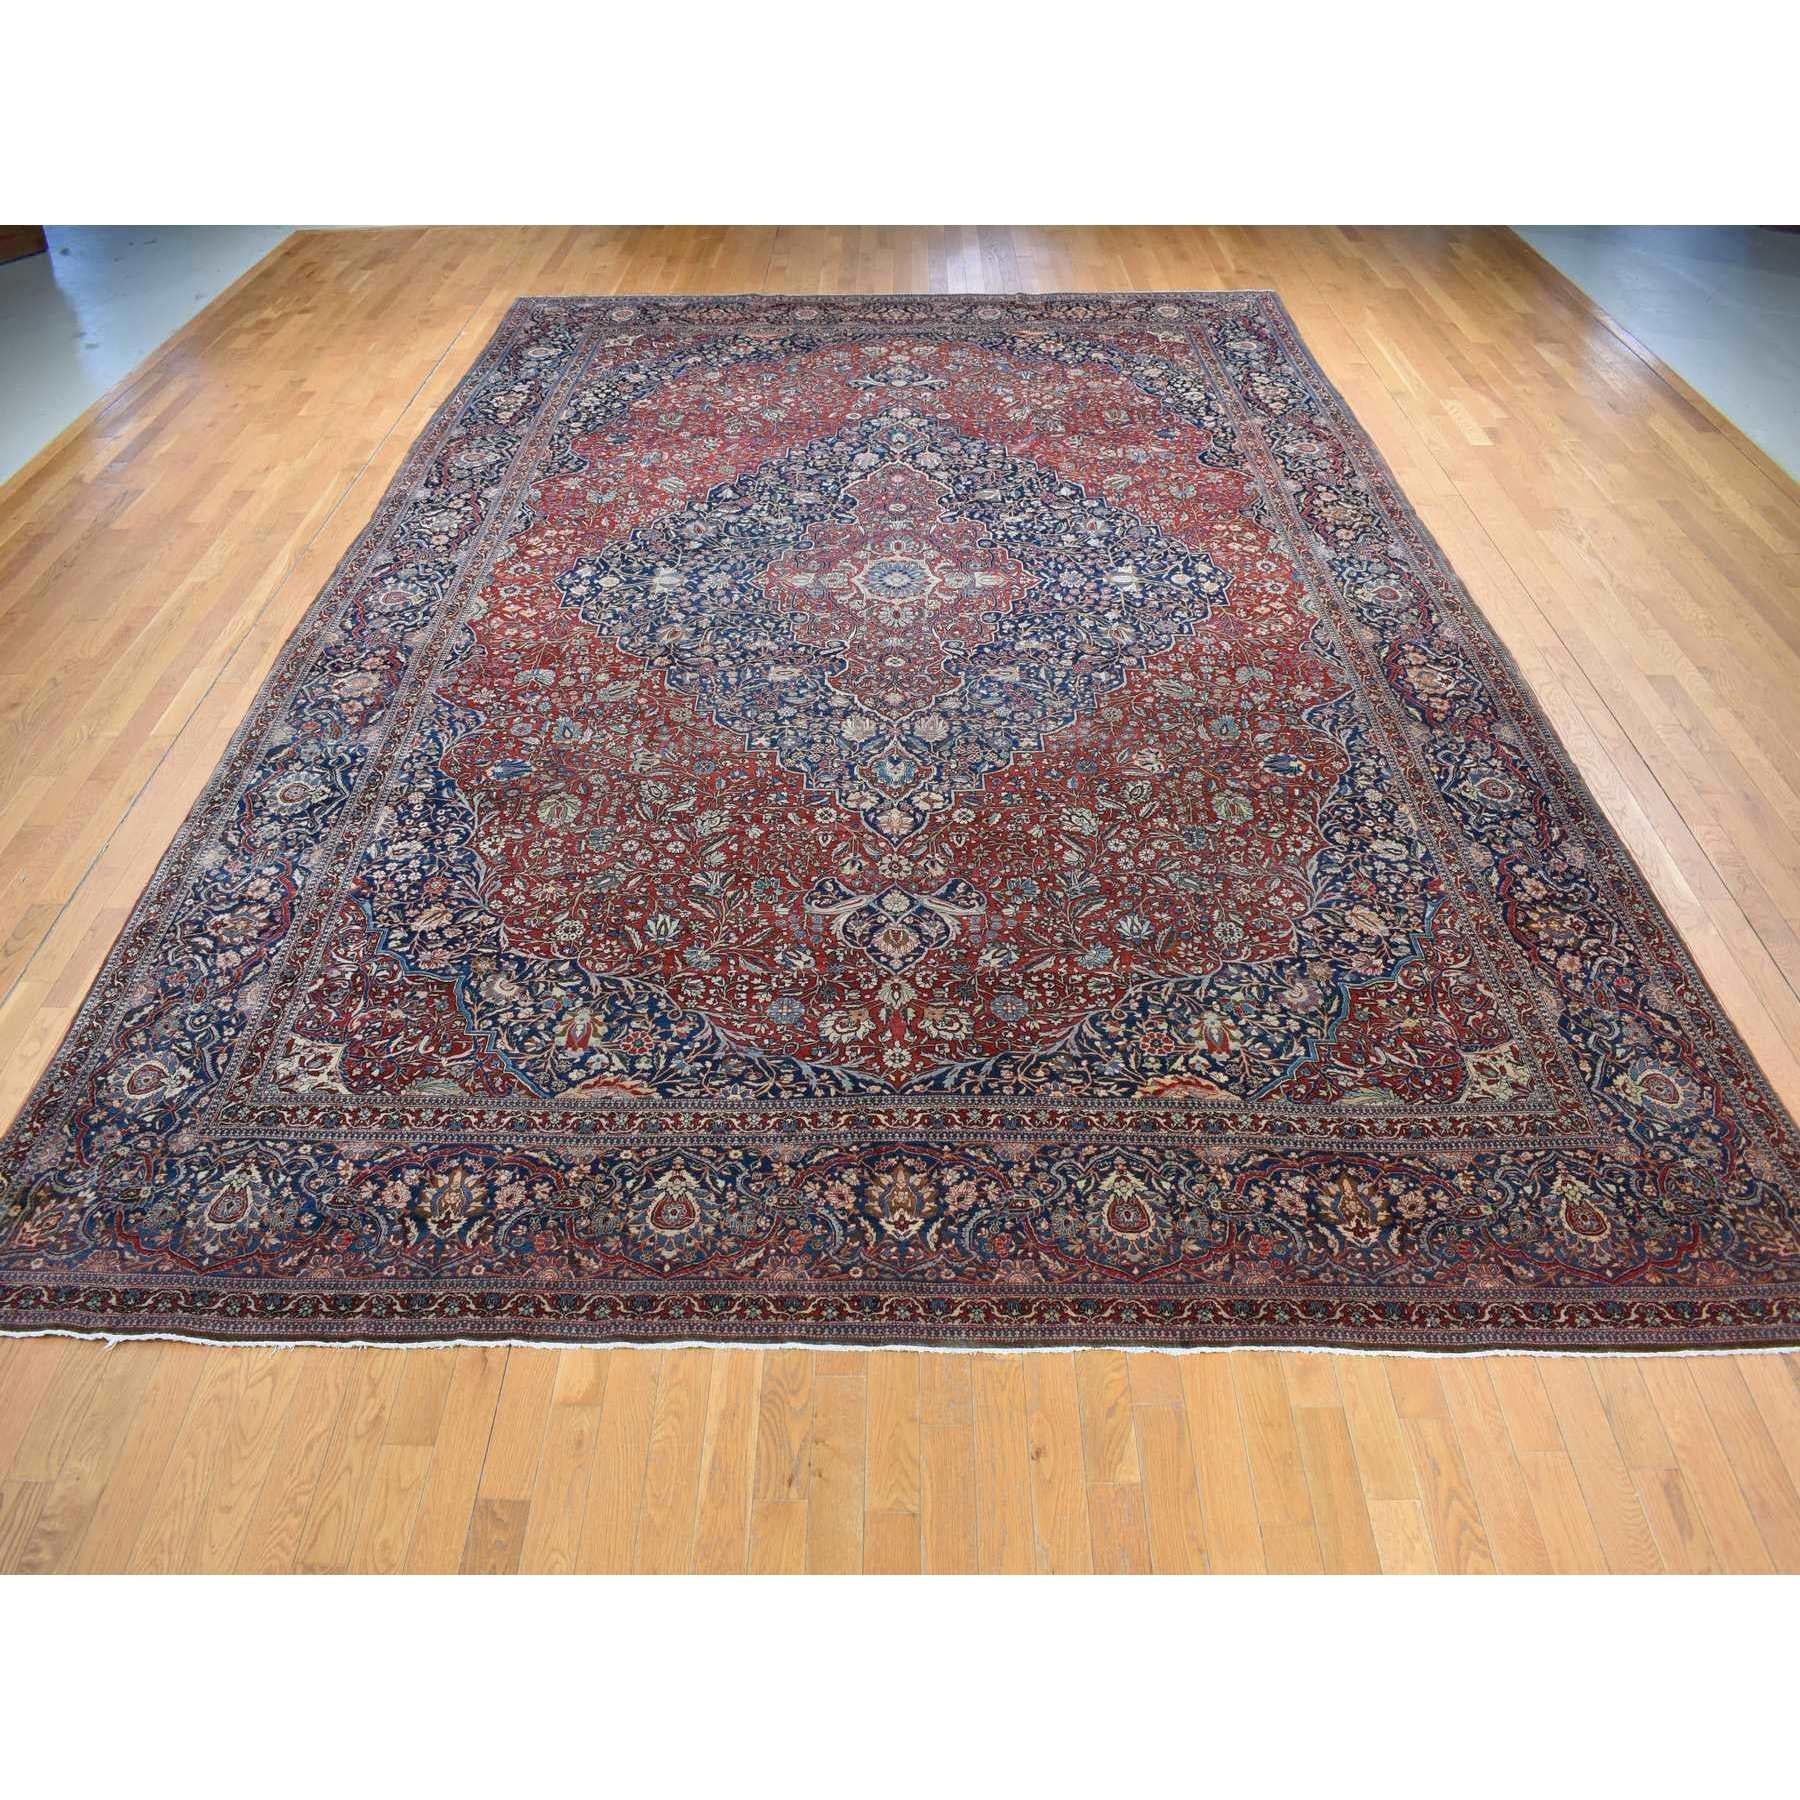 This fabulous hand-knotted carpet has been created and designed for extra strength and durability. This rug has been handcrafted for weeks in the traditional method that is used to makeExact Rug Size in Feet and Inches : 11'2